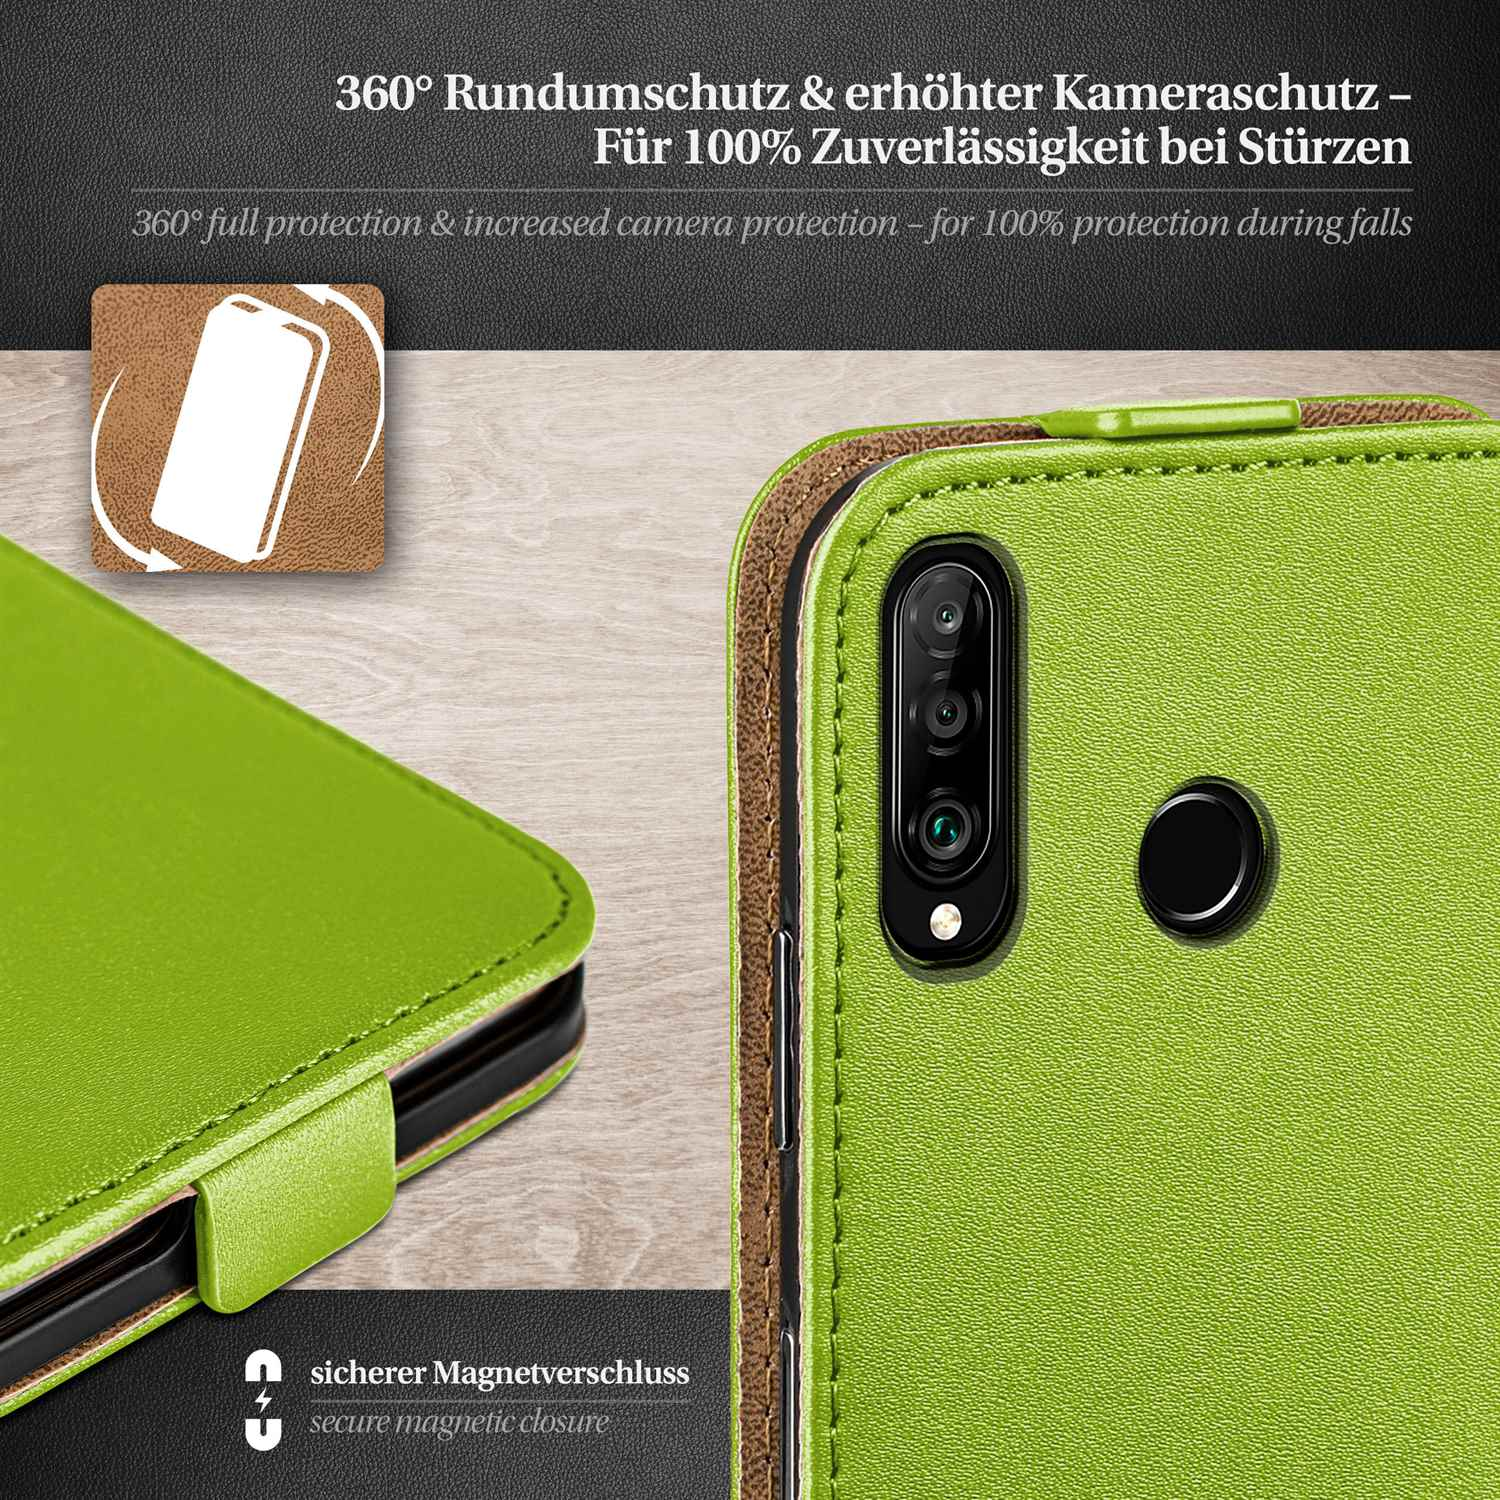 Flip Lite Huawei, New MOEX Cover, Flip Lime-Green Case, P30 Edition,